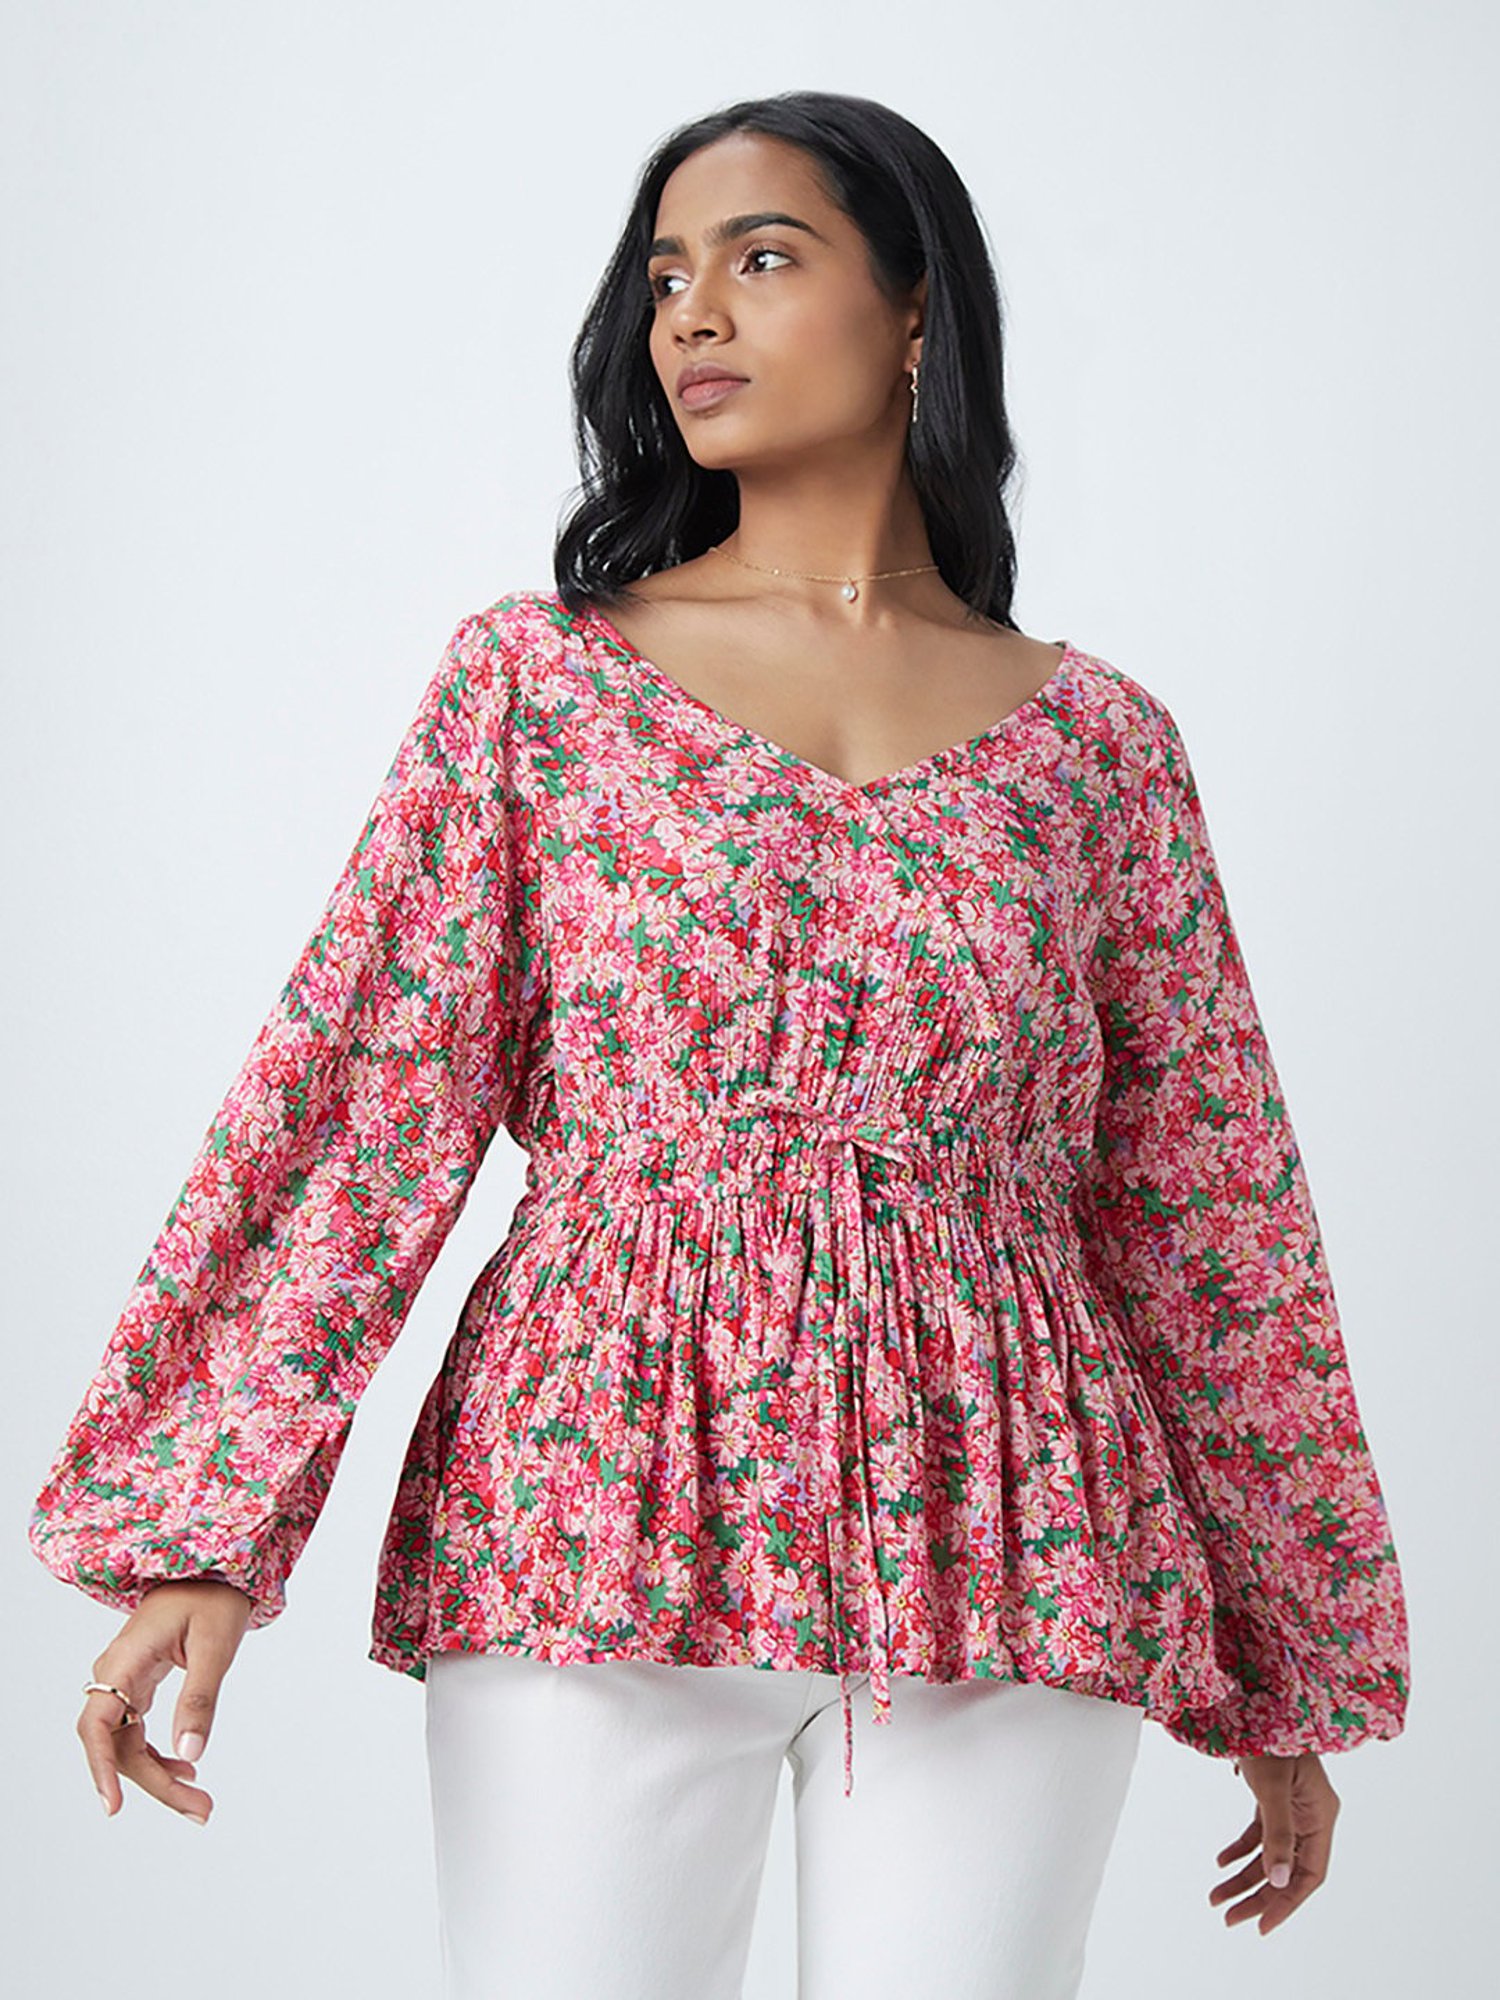 Women's Shirts & Blouses: Flowy, Floral, Peasant & More